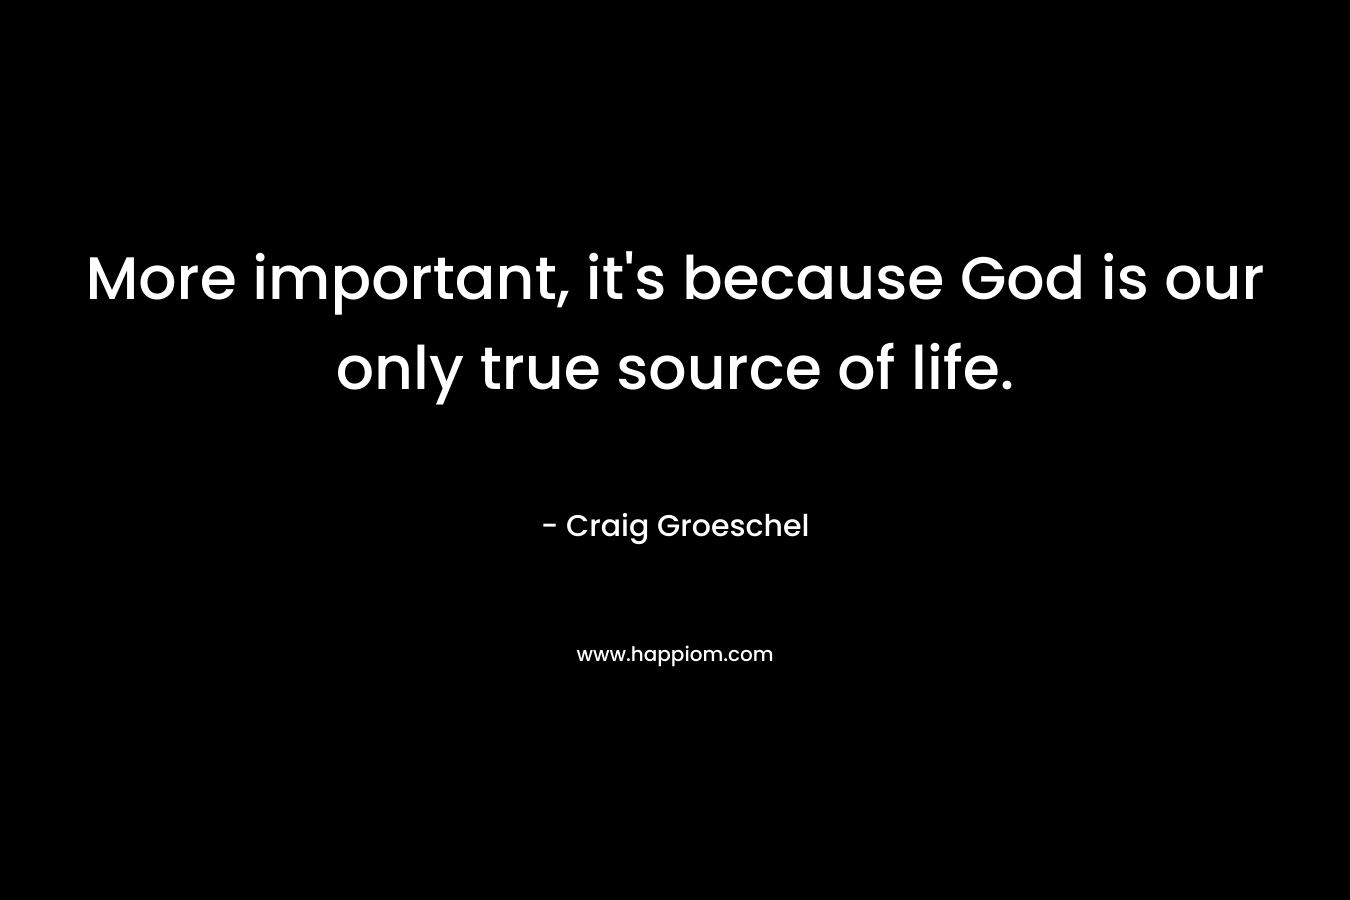 More important, it's because God is our only true source of life.